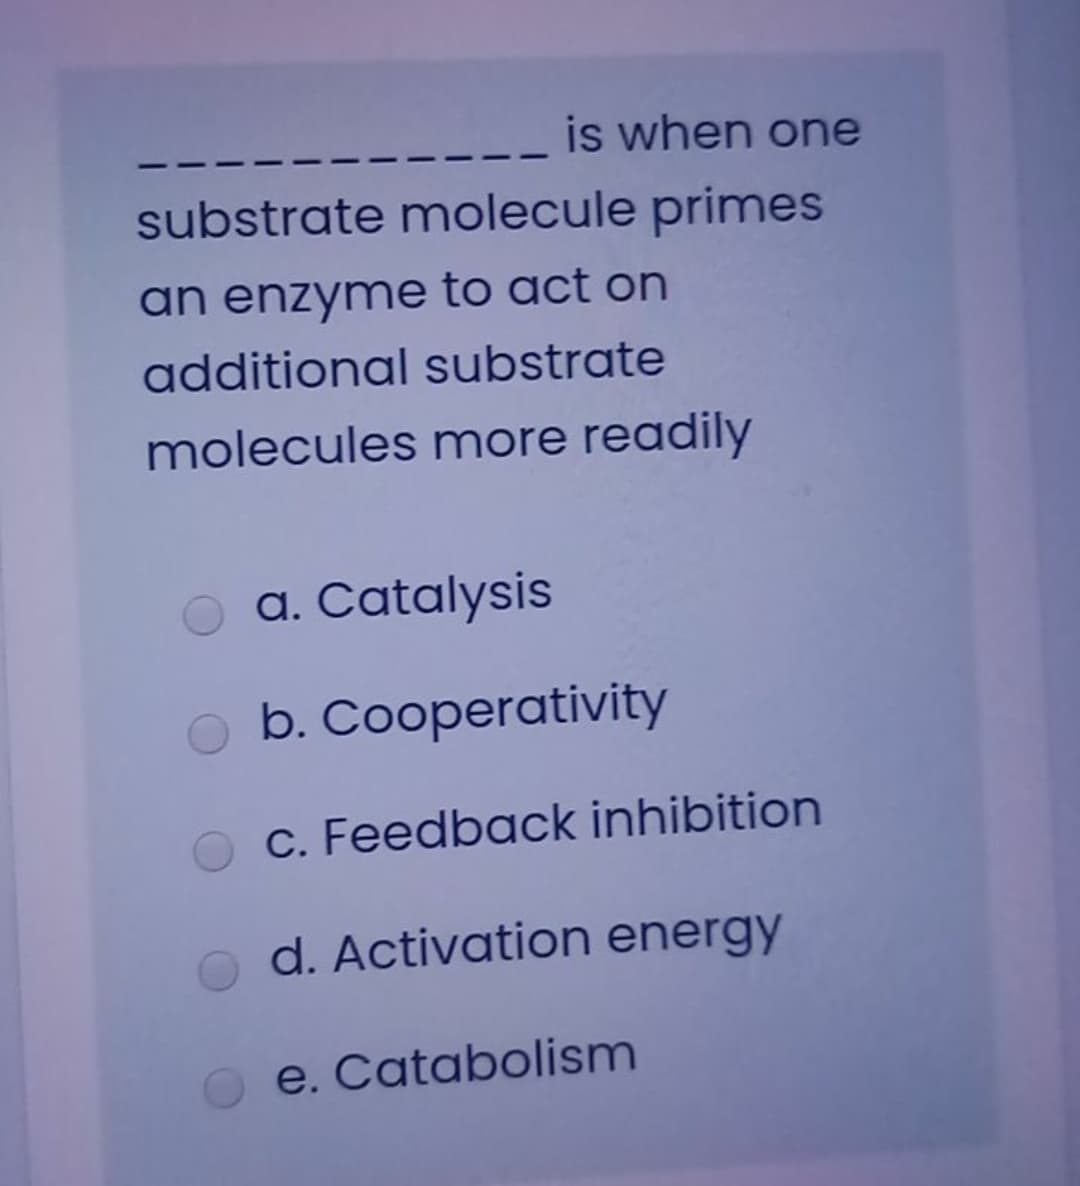 is when one
substrate molecule primes
an enzyme to act on
additional substrate
molecules more readily
a. Catalysis
b. Cooperativity
c. Feedback inhibition
d. Activation energy
e. Catabolism
